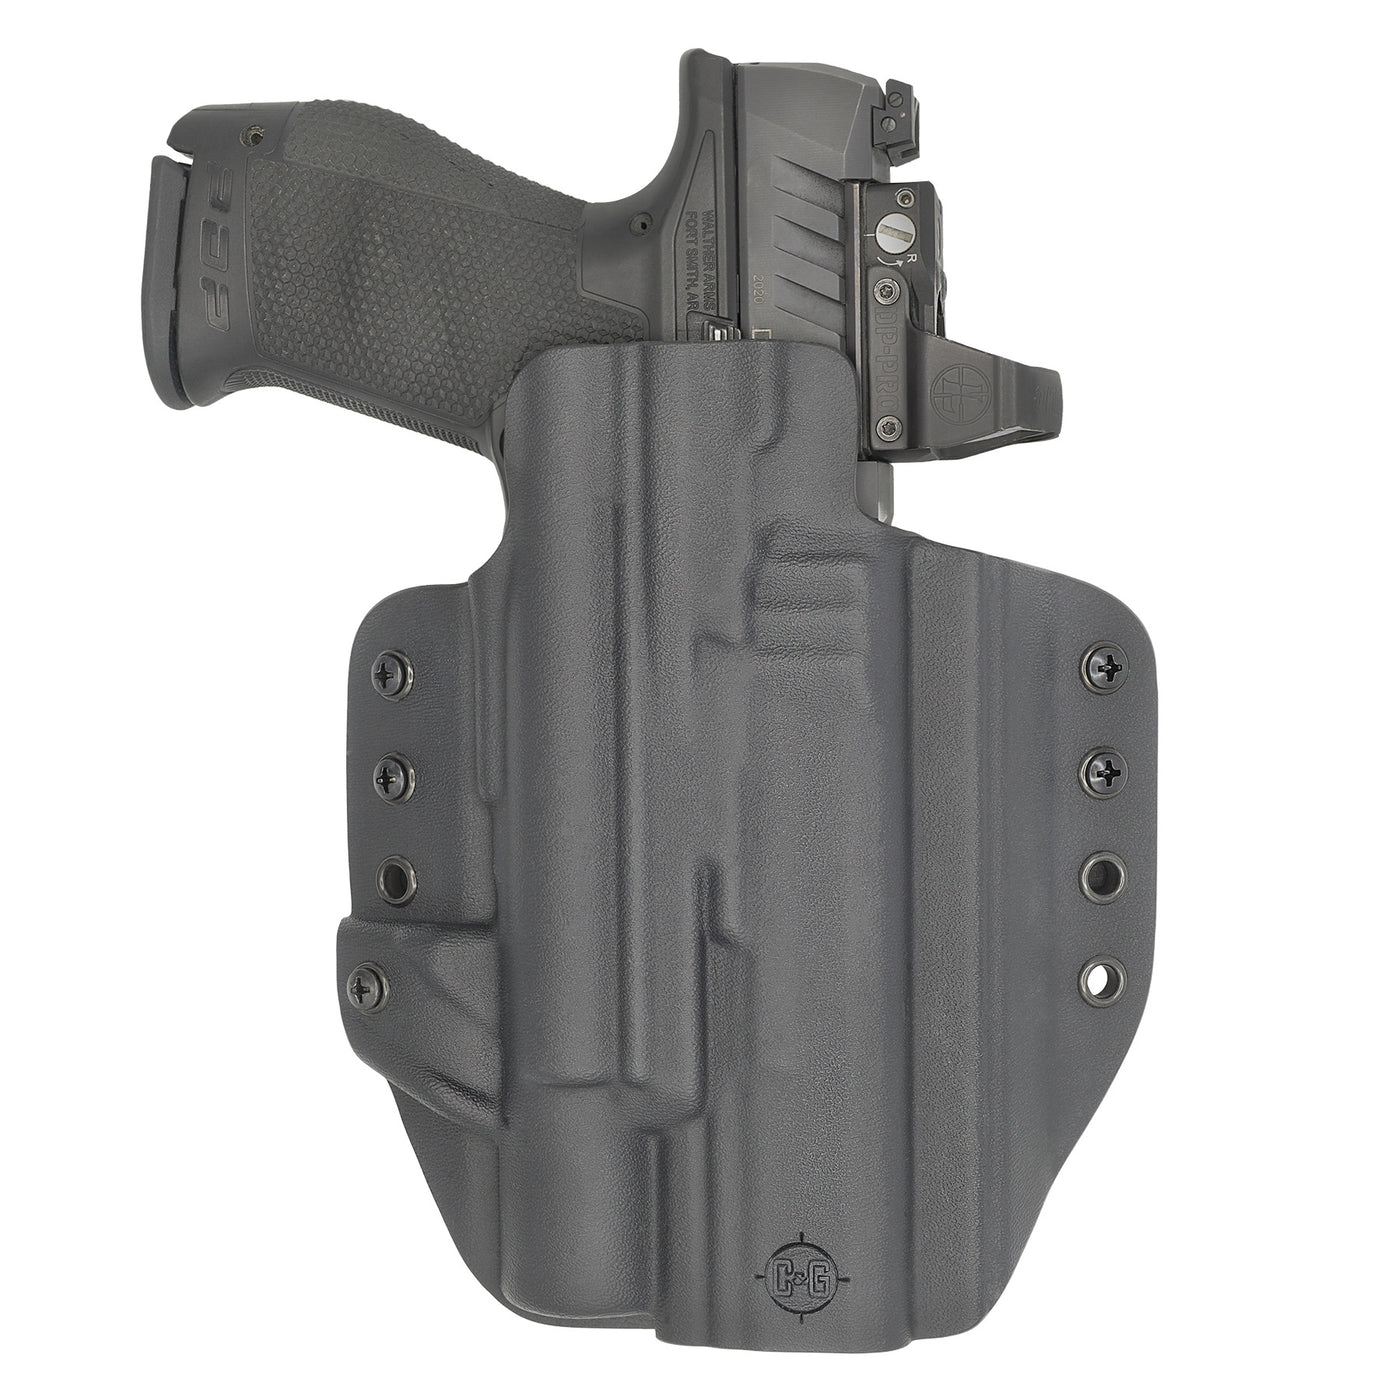 C&G Holsters custom OWB Tactical Beretta Surefire X300 in holstered position